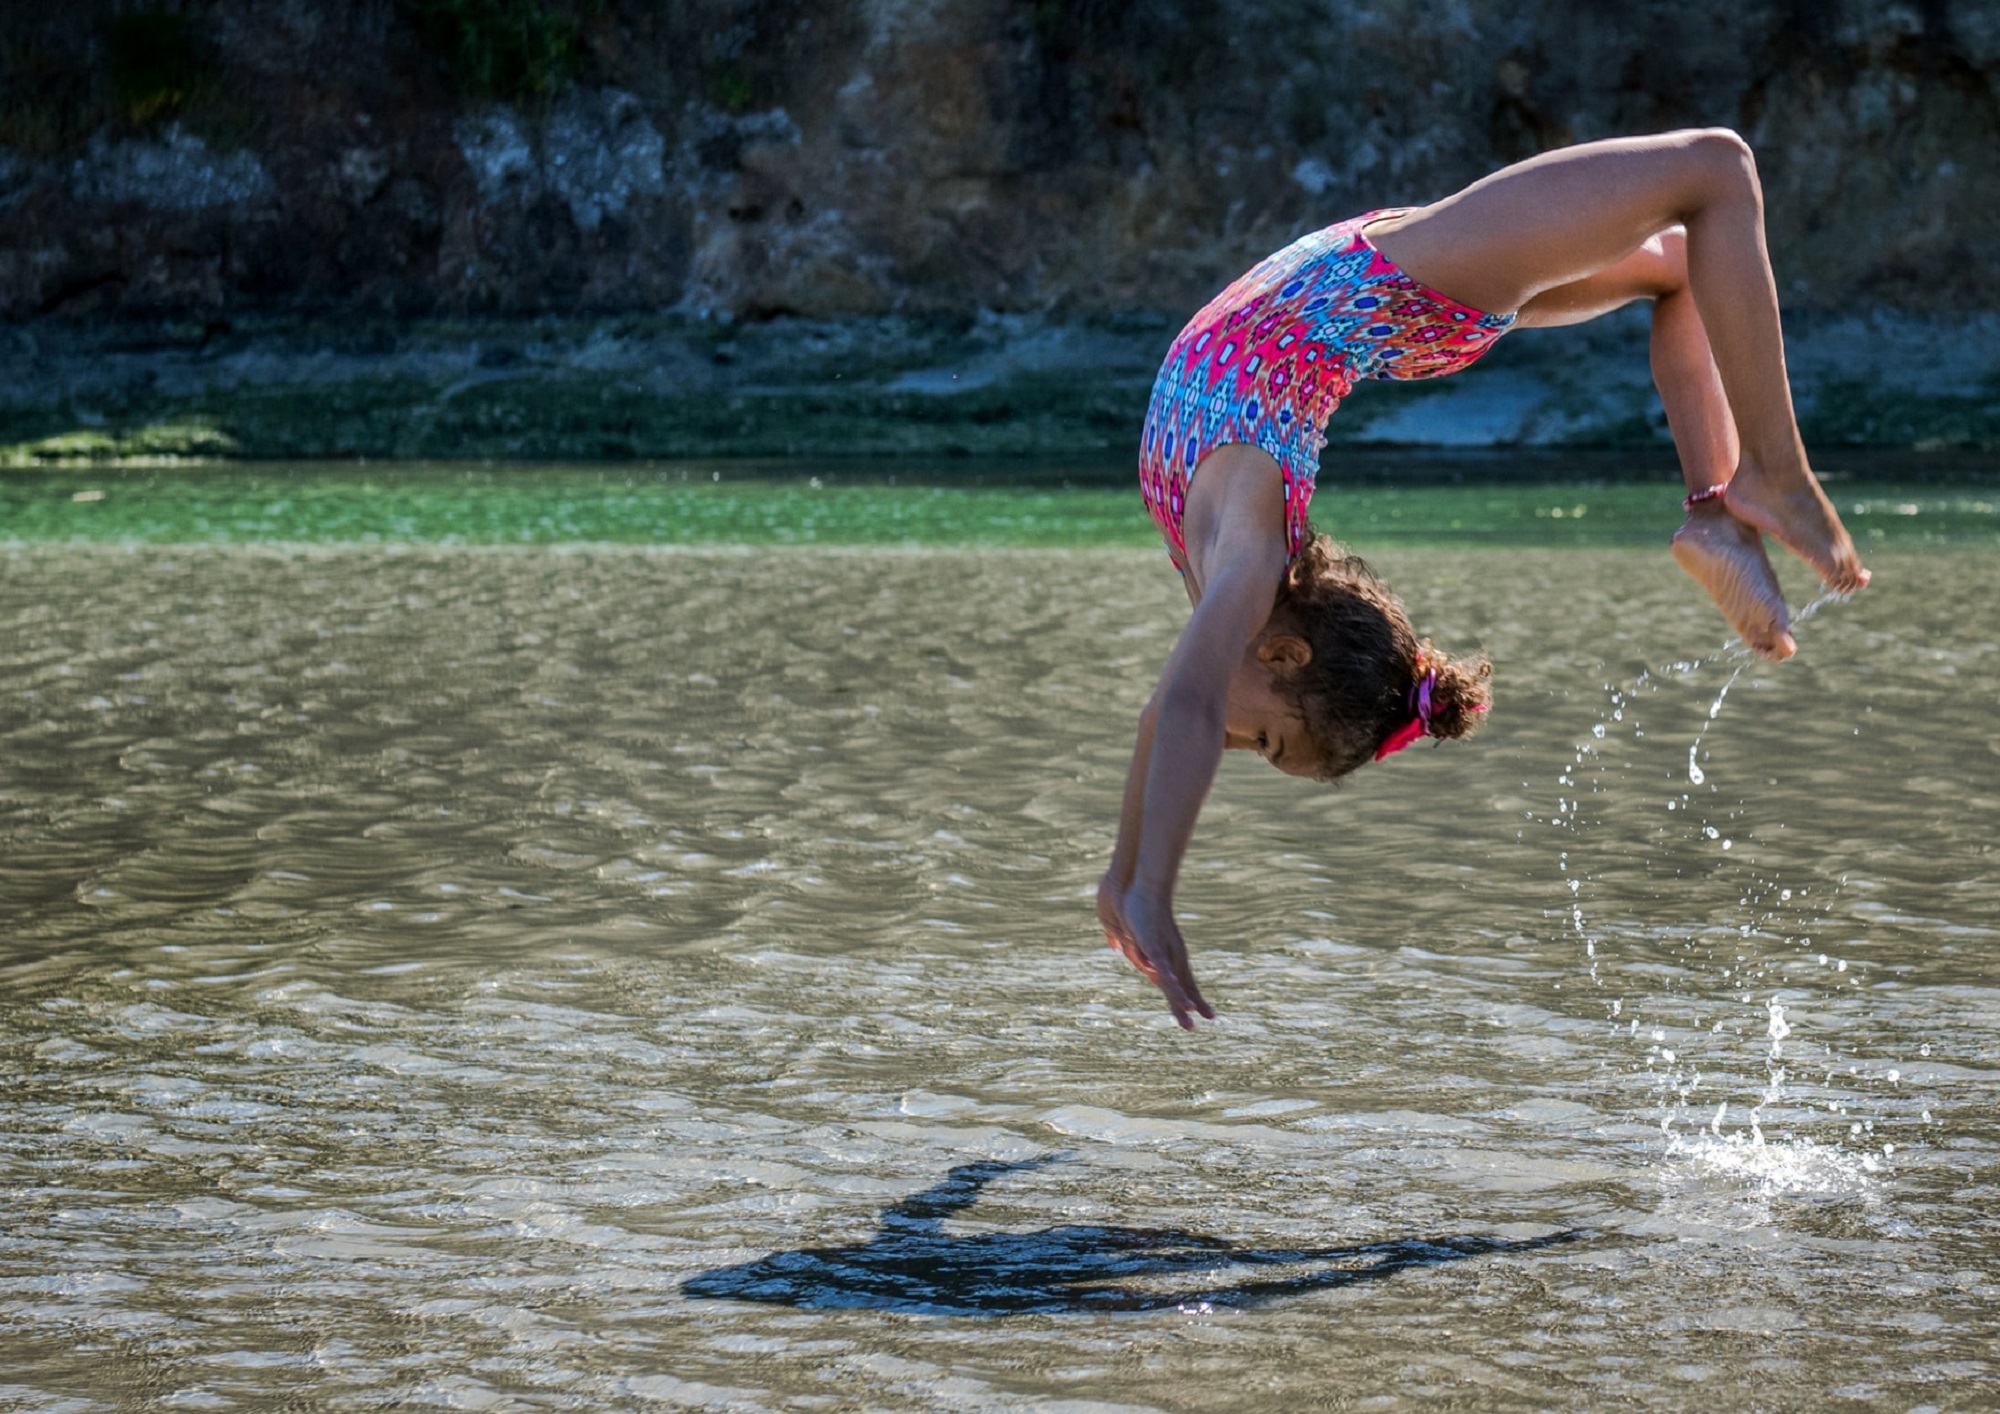 Kid in pink bathing suit doing a flip in a lake